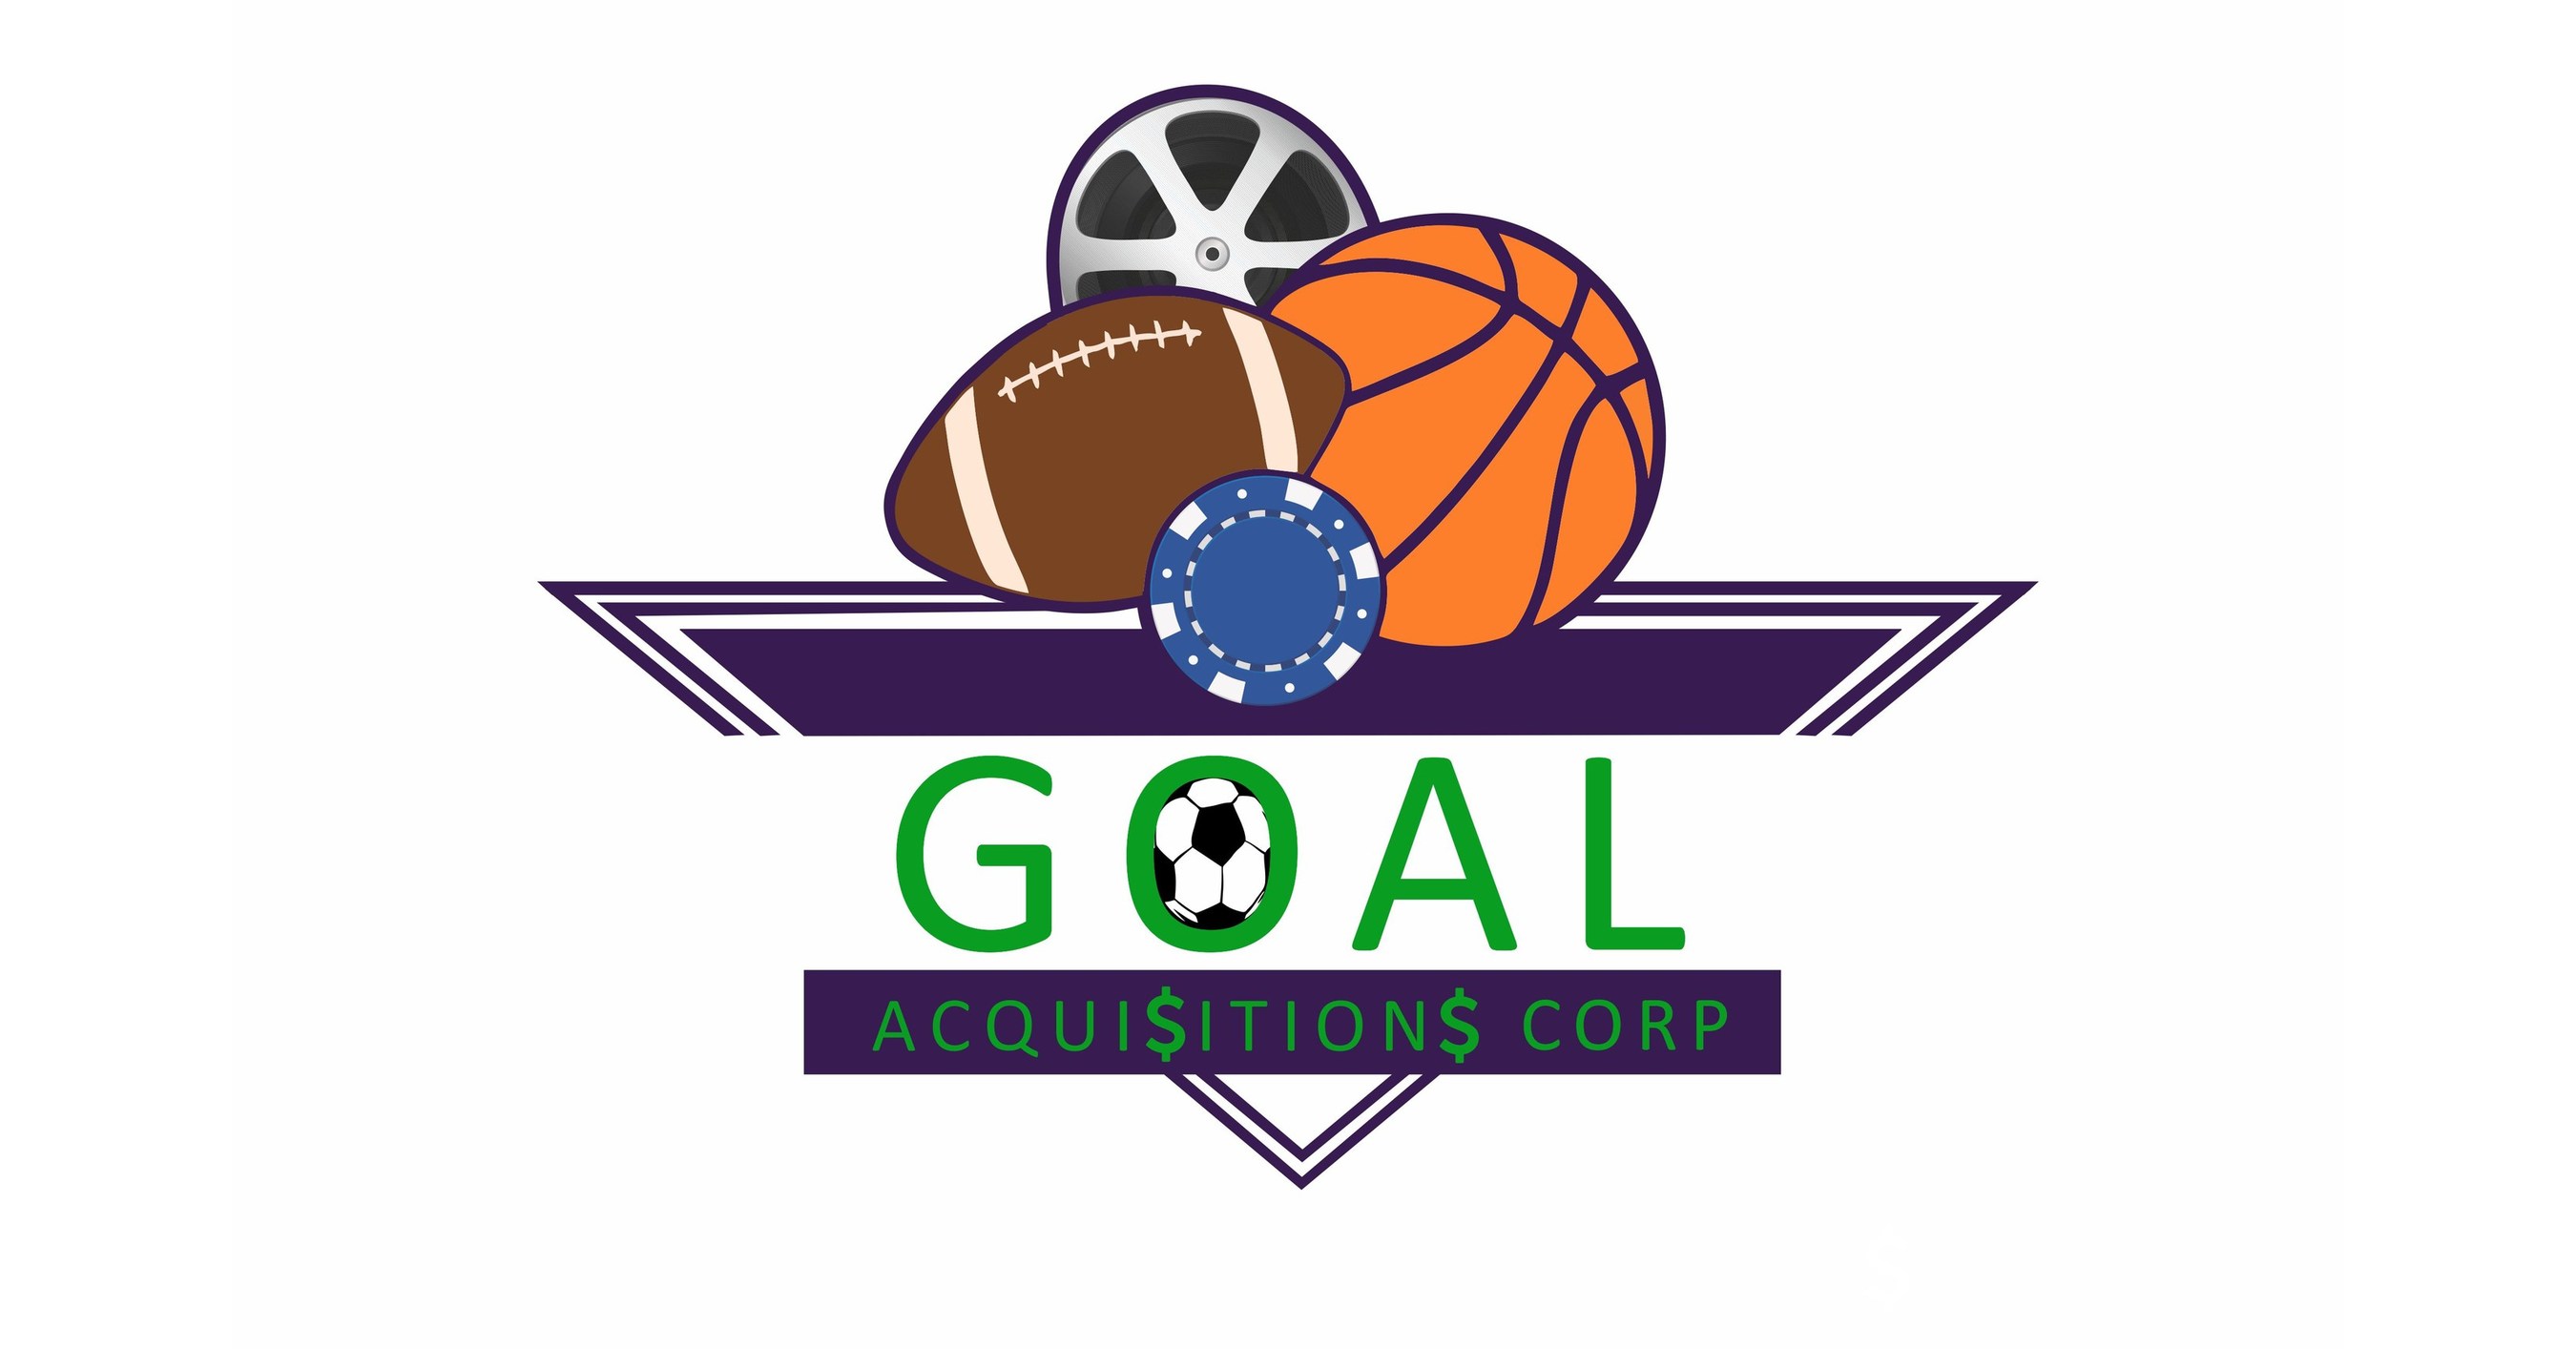 Goal Acquisitions Corp